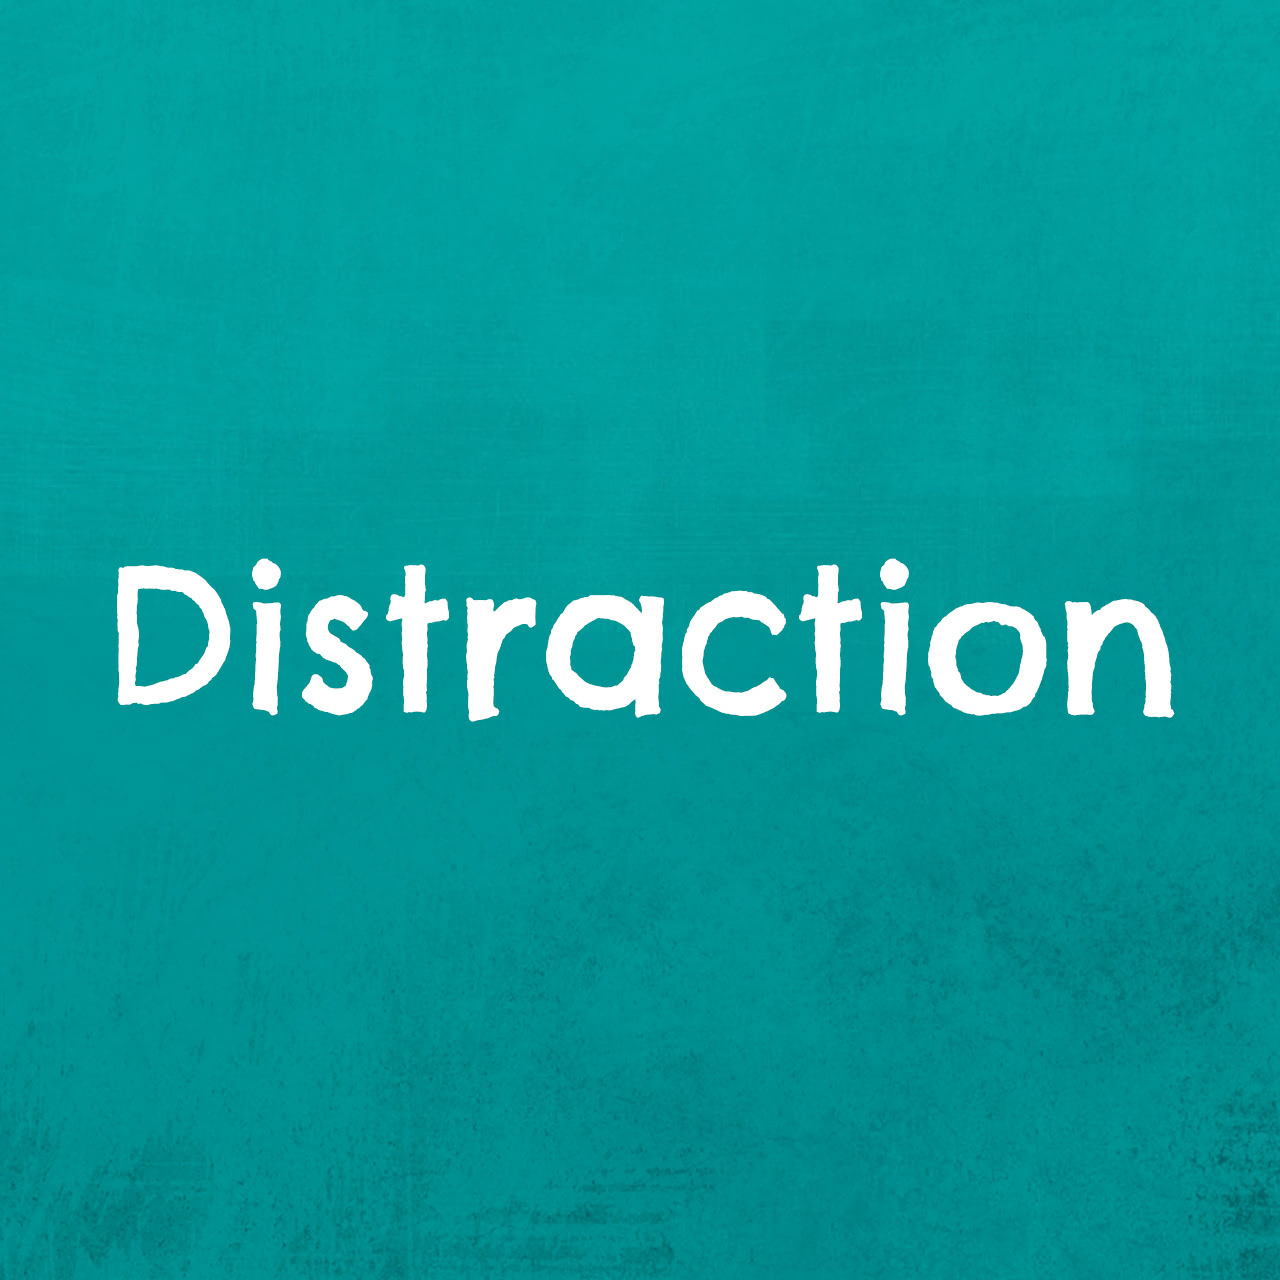 DISTRACTION